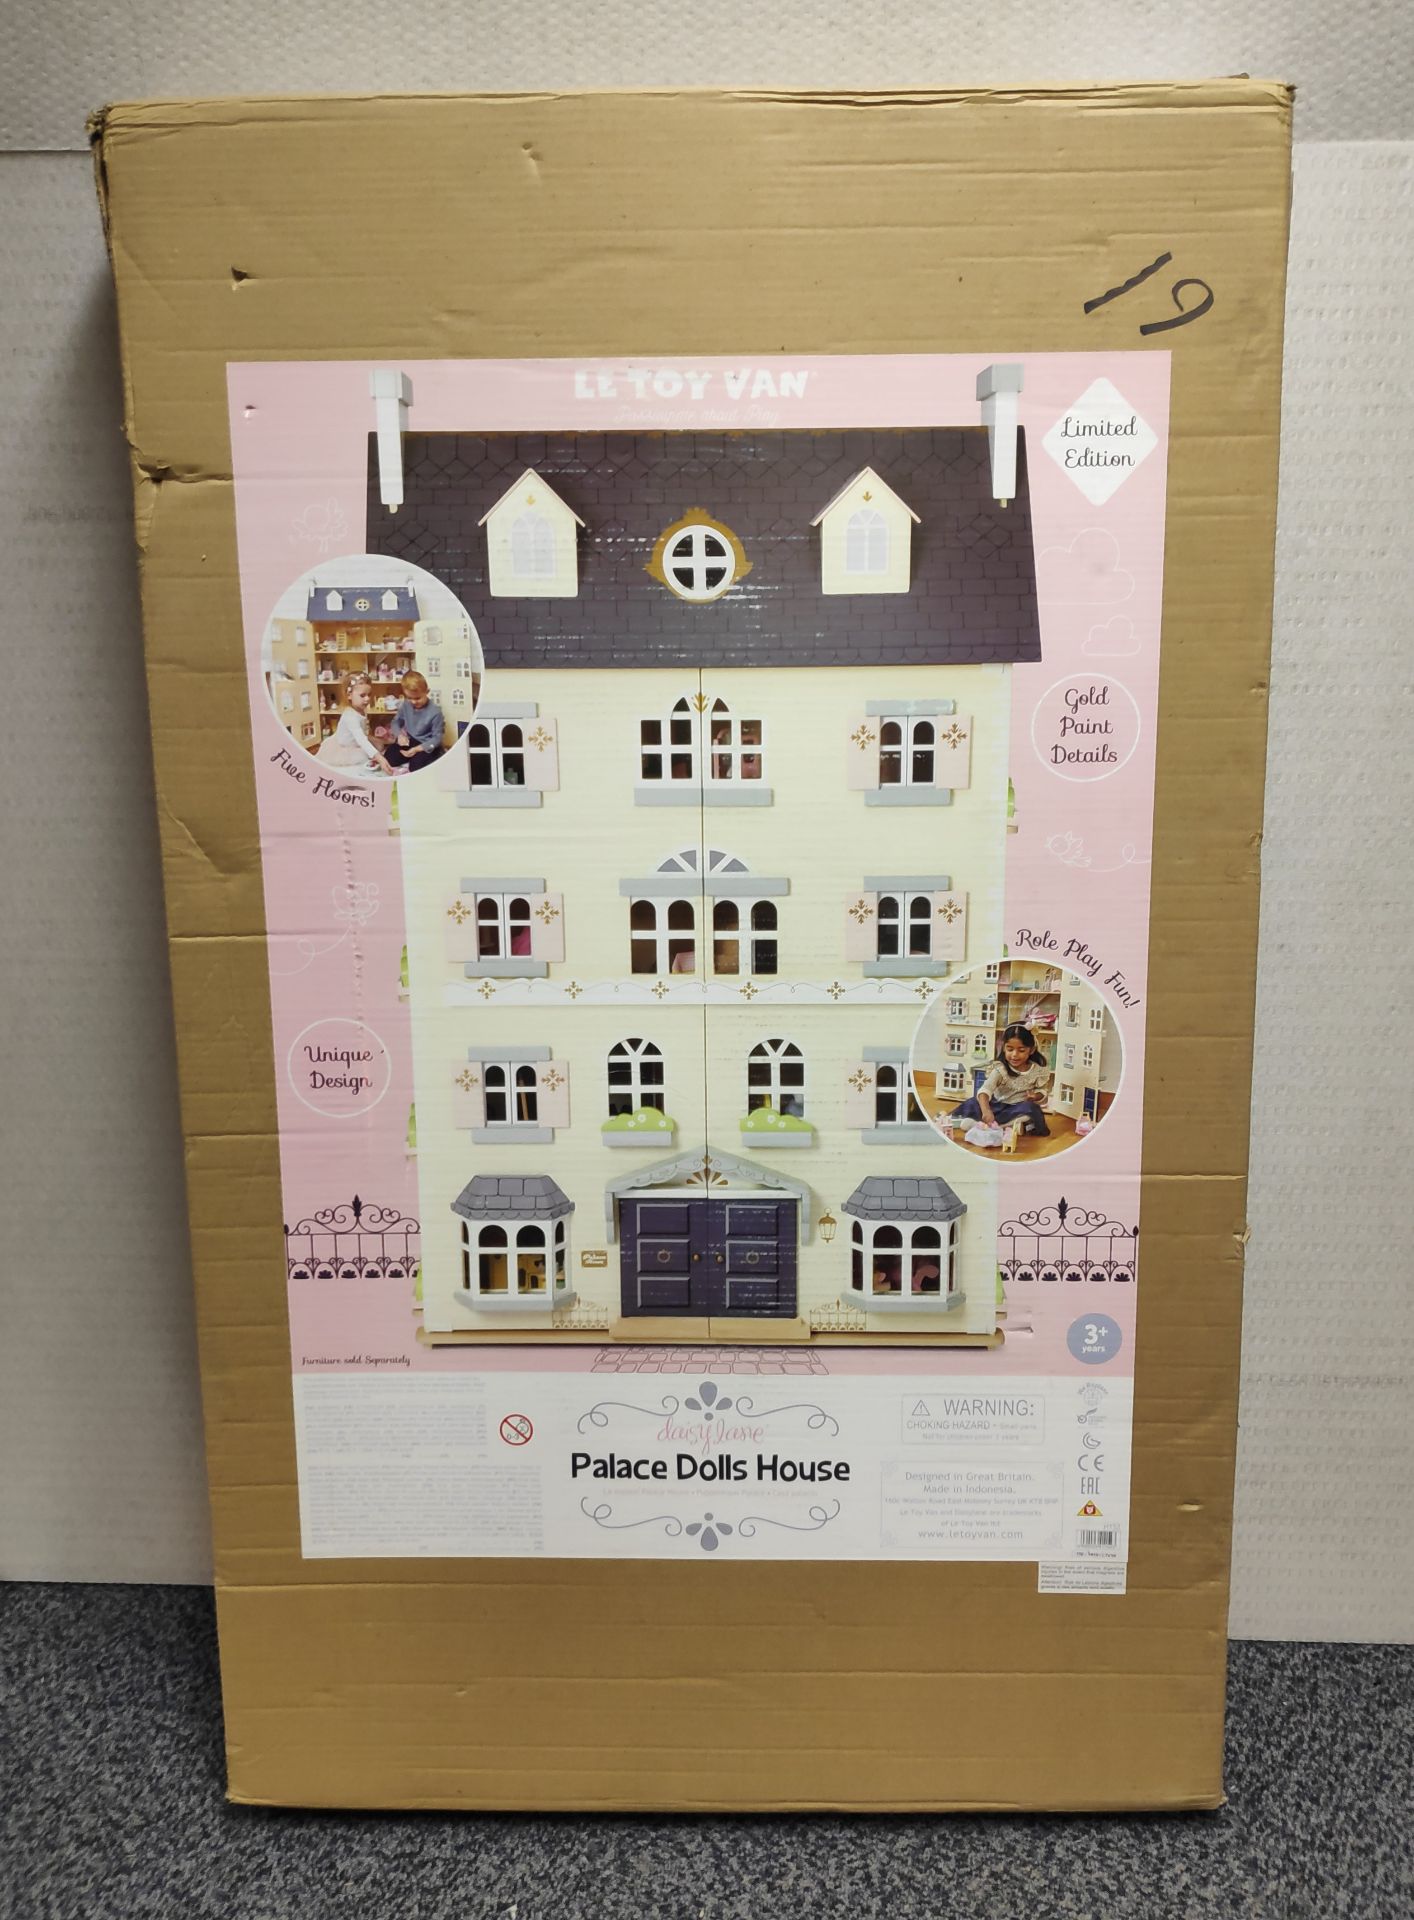 1 x Le Toy Van Wooden Palace Dolls House - New/Boxed - HTYS163 - CL987 - Location: Altrincham WA14 - - Image 4 of 10